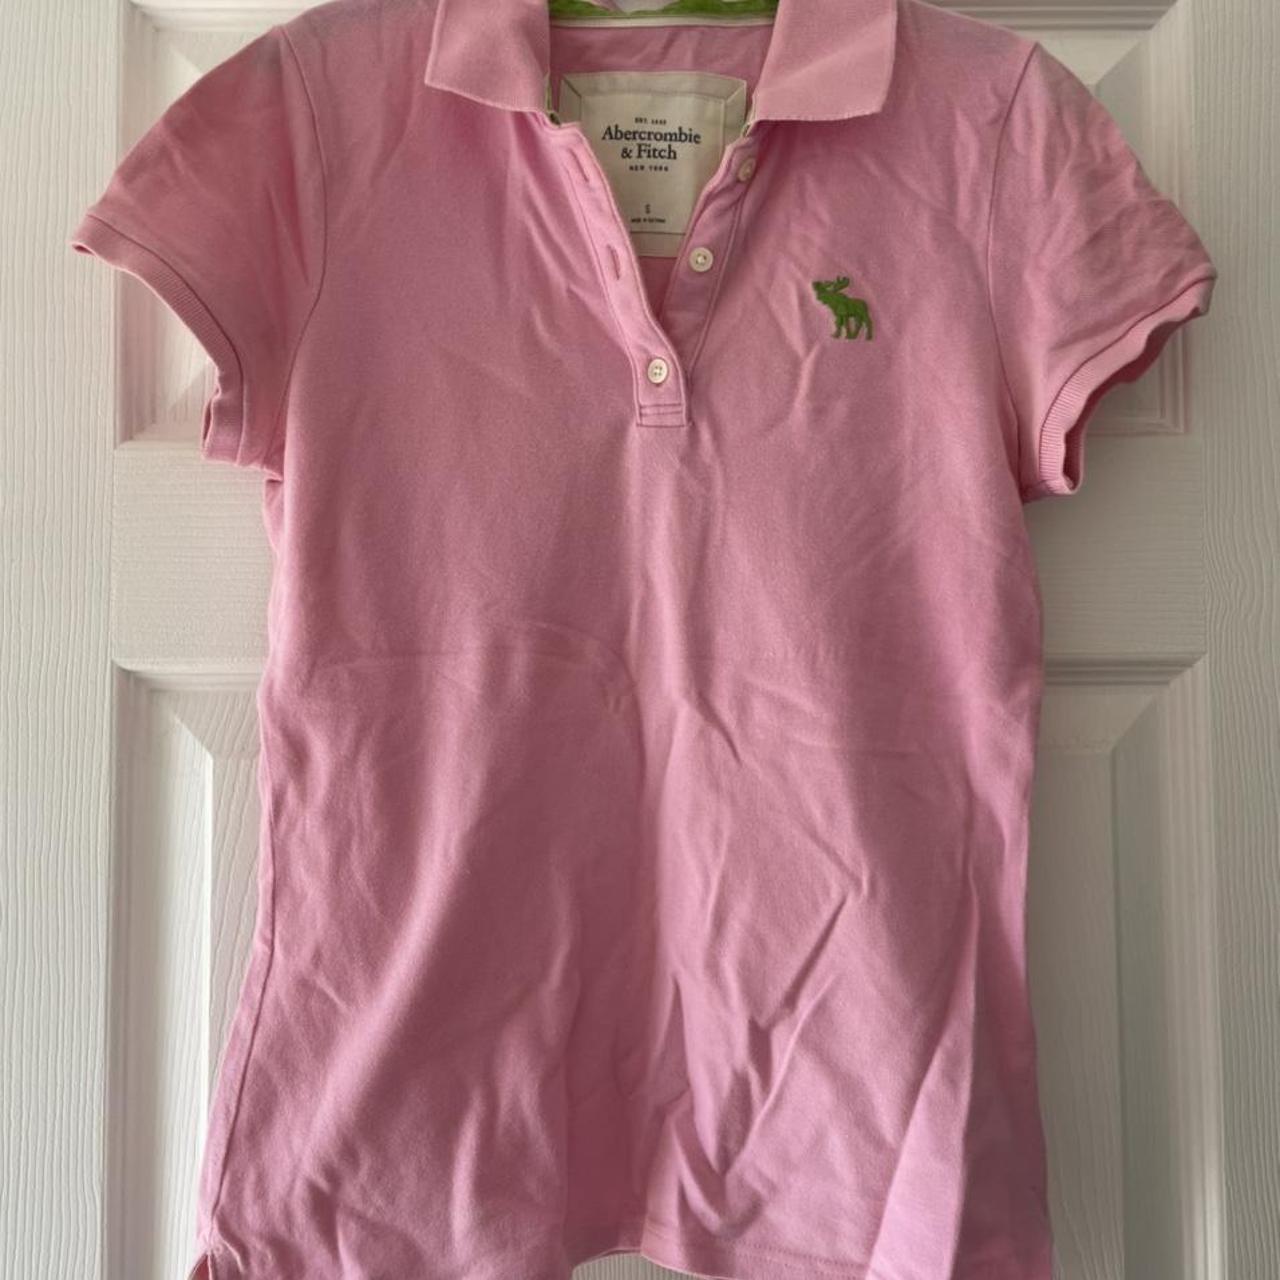 Abercrombie & Fitch Women's Pink Polo-shirts | Depop